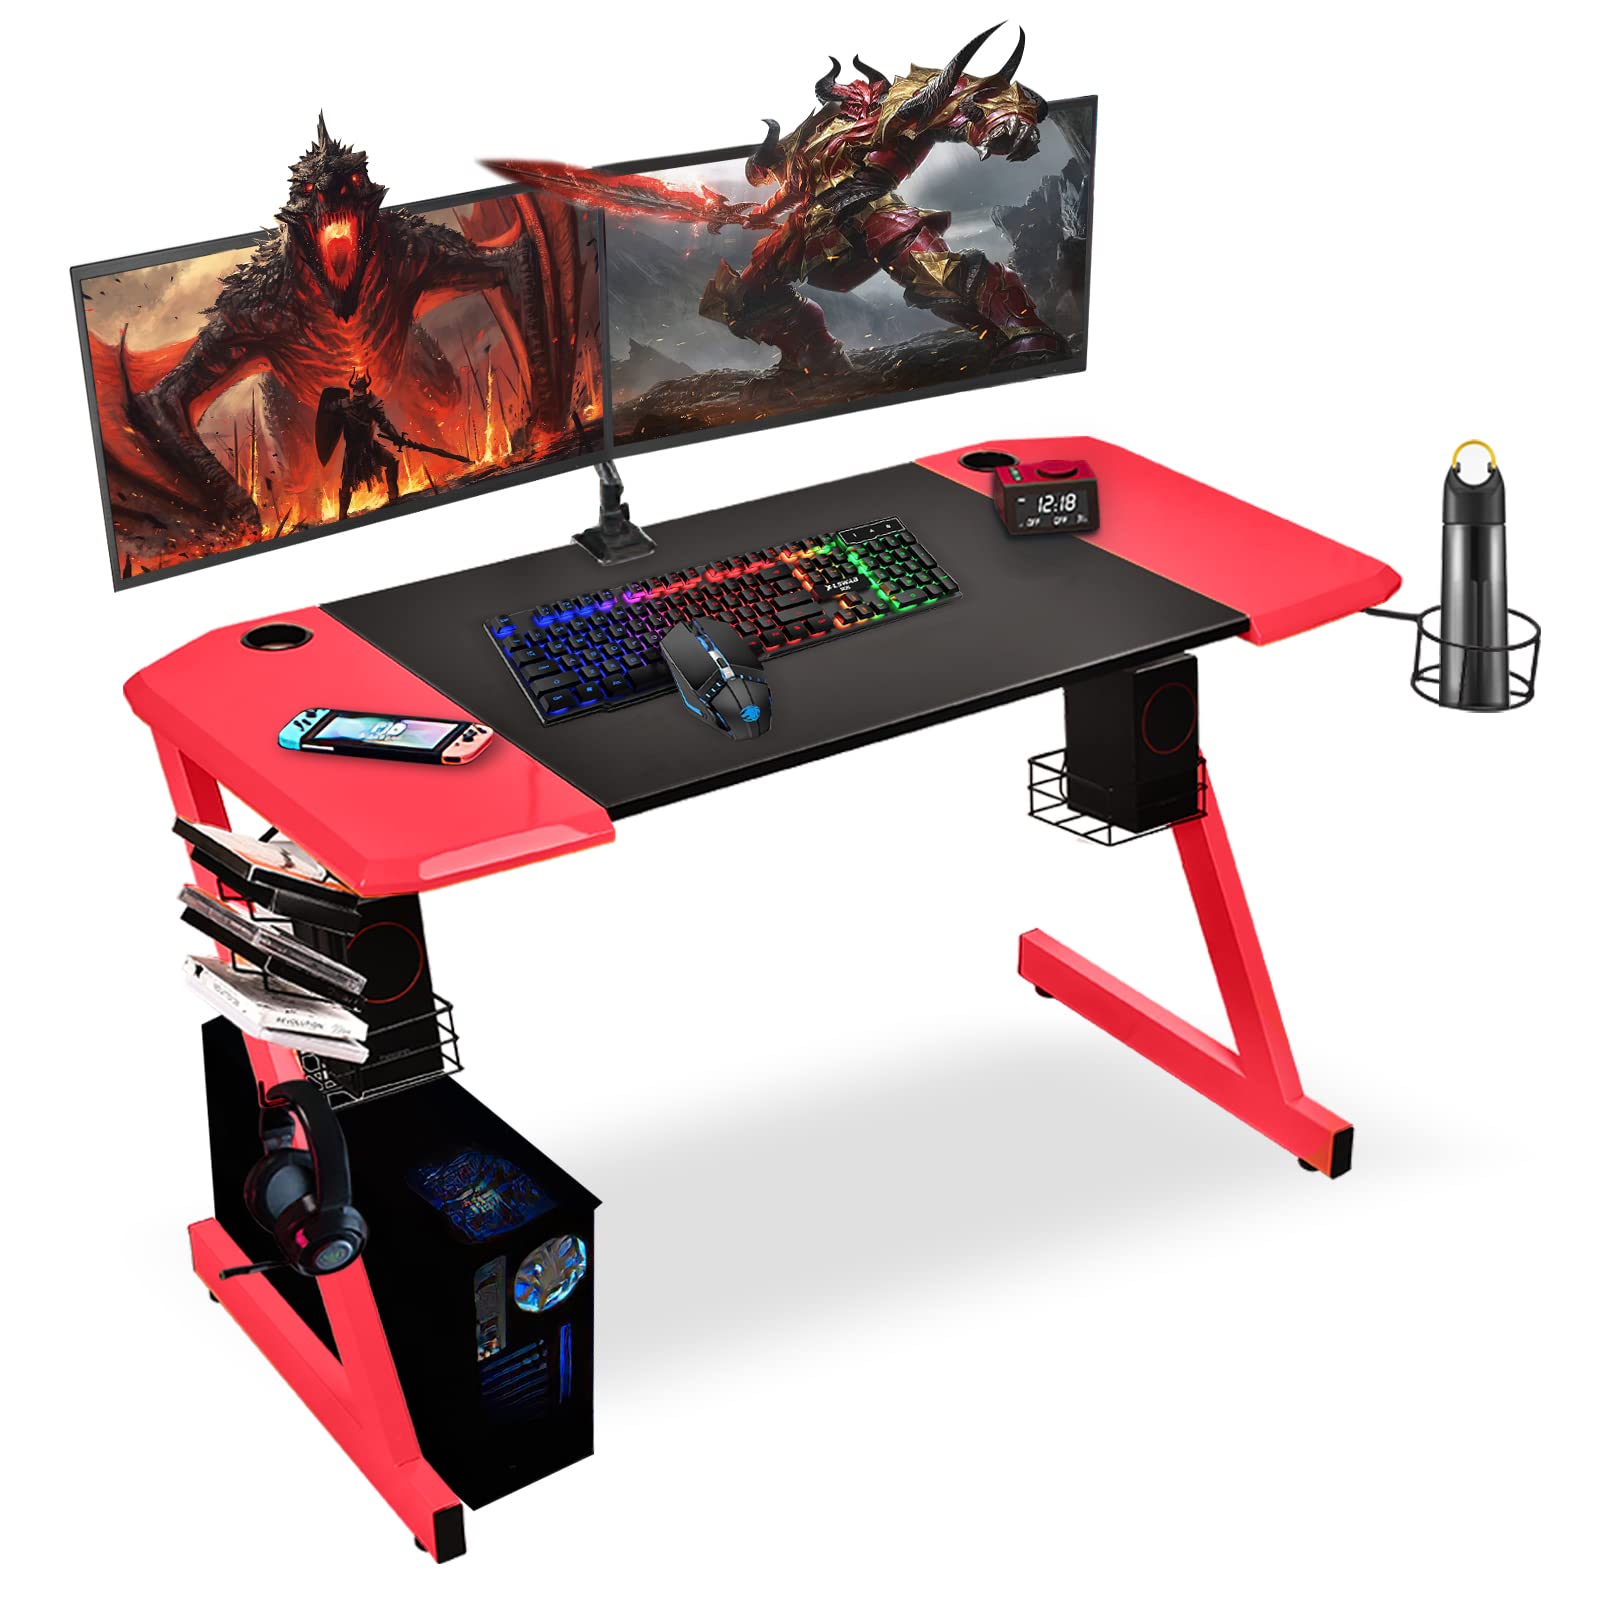 Grepatio Gaming Desk, Home Office PC Computer Desk, Professional E-Sport Gamer Table Workstation with Speaker Stands, Cup Holder, Gaming Handle Rac...